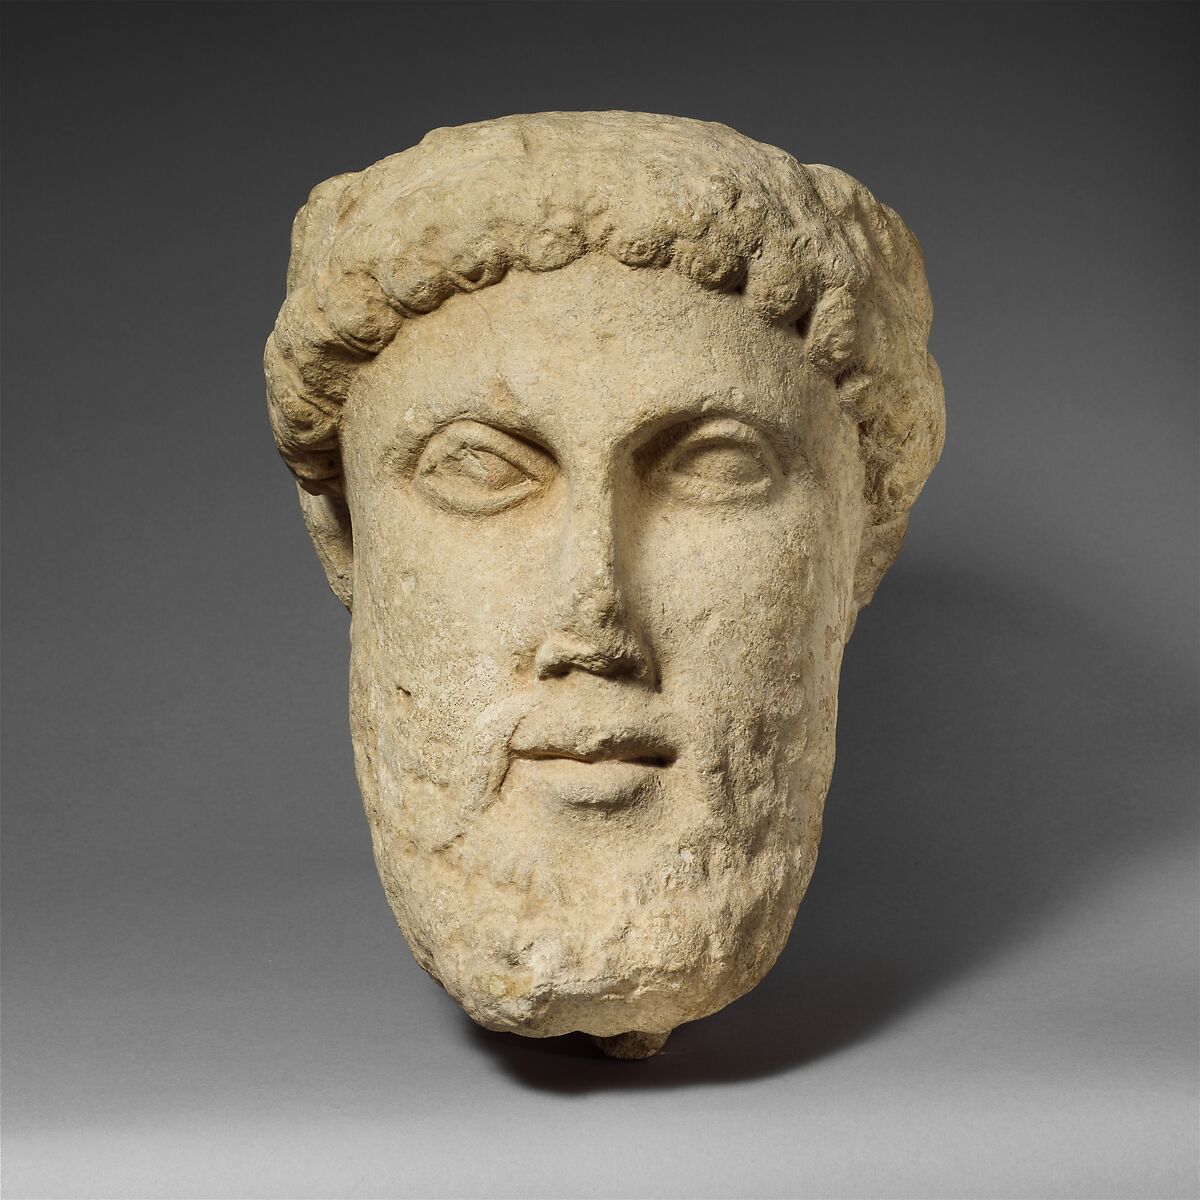 Limestone head of a bearded male with a wreath of leaves, Limestone, Cypriot 